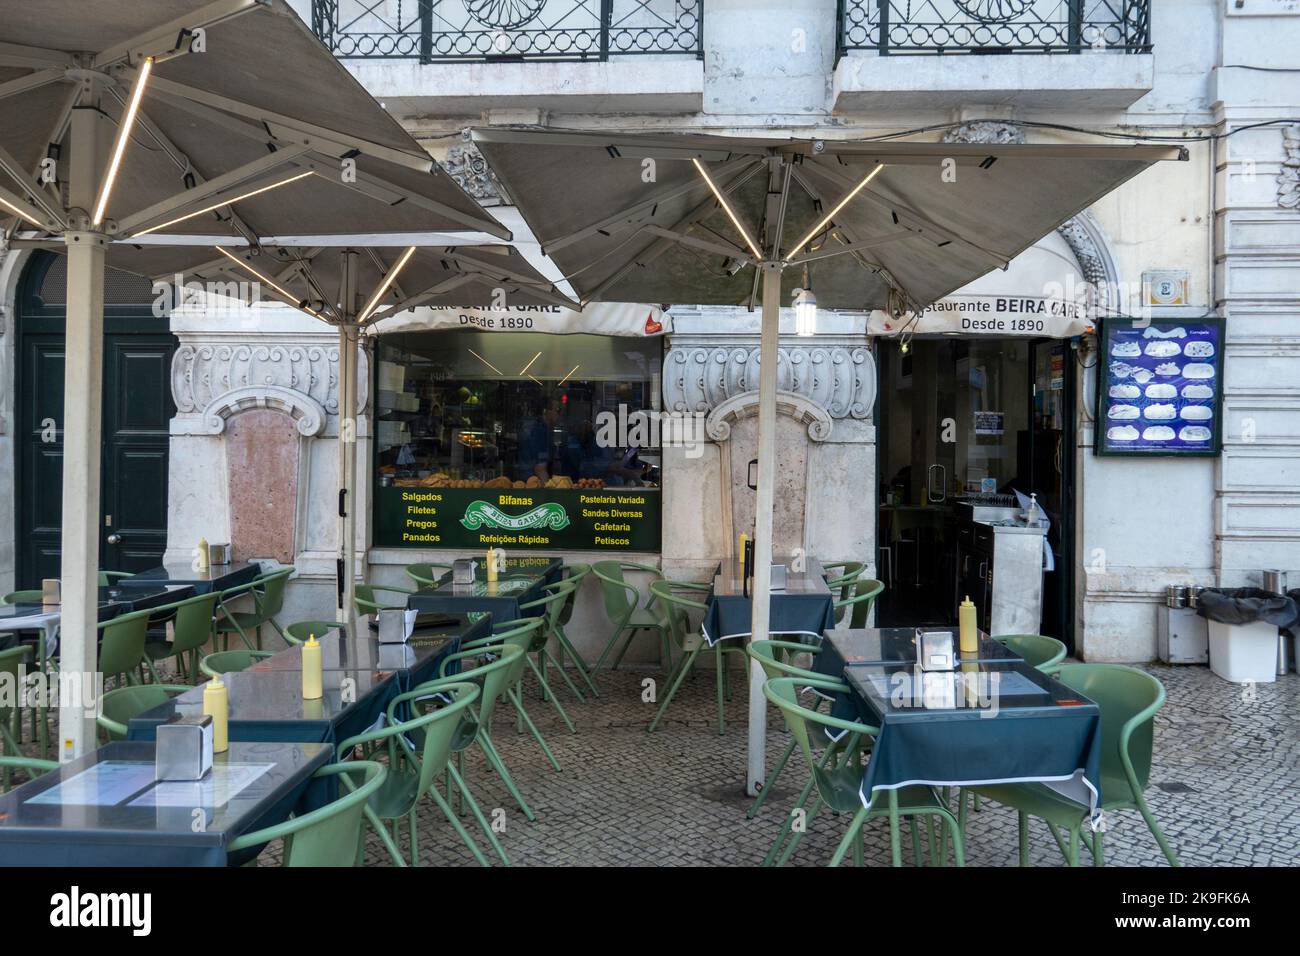 LISBON, PORTUGAL, 28th JUNE 2022: View of the vintage restaurant , Beira Gare, a vintage restaurant specialized in portuguese cuisine founded in 1890, Stock Photo